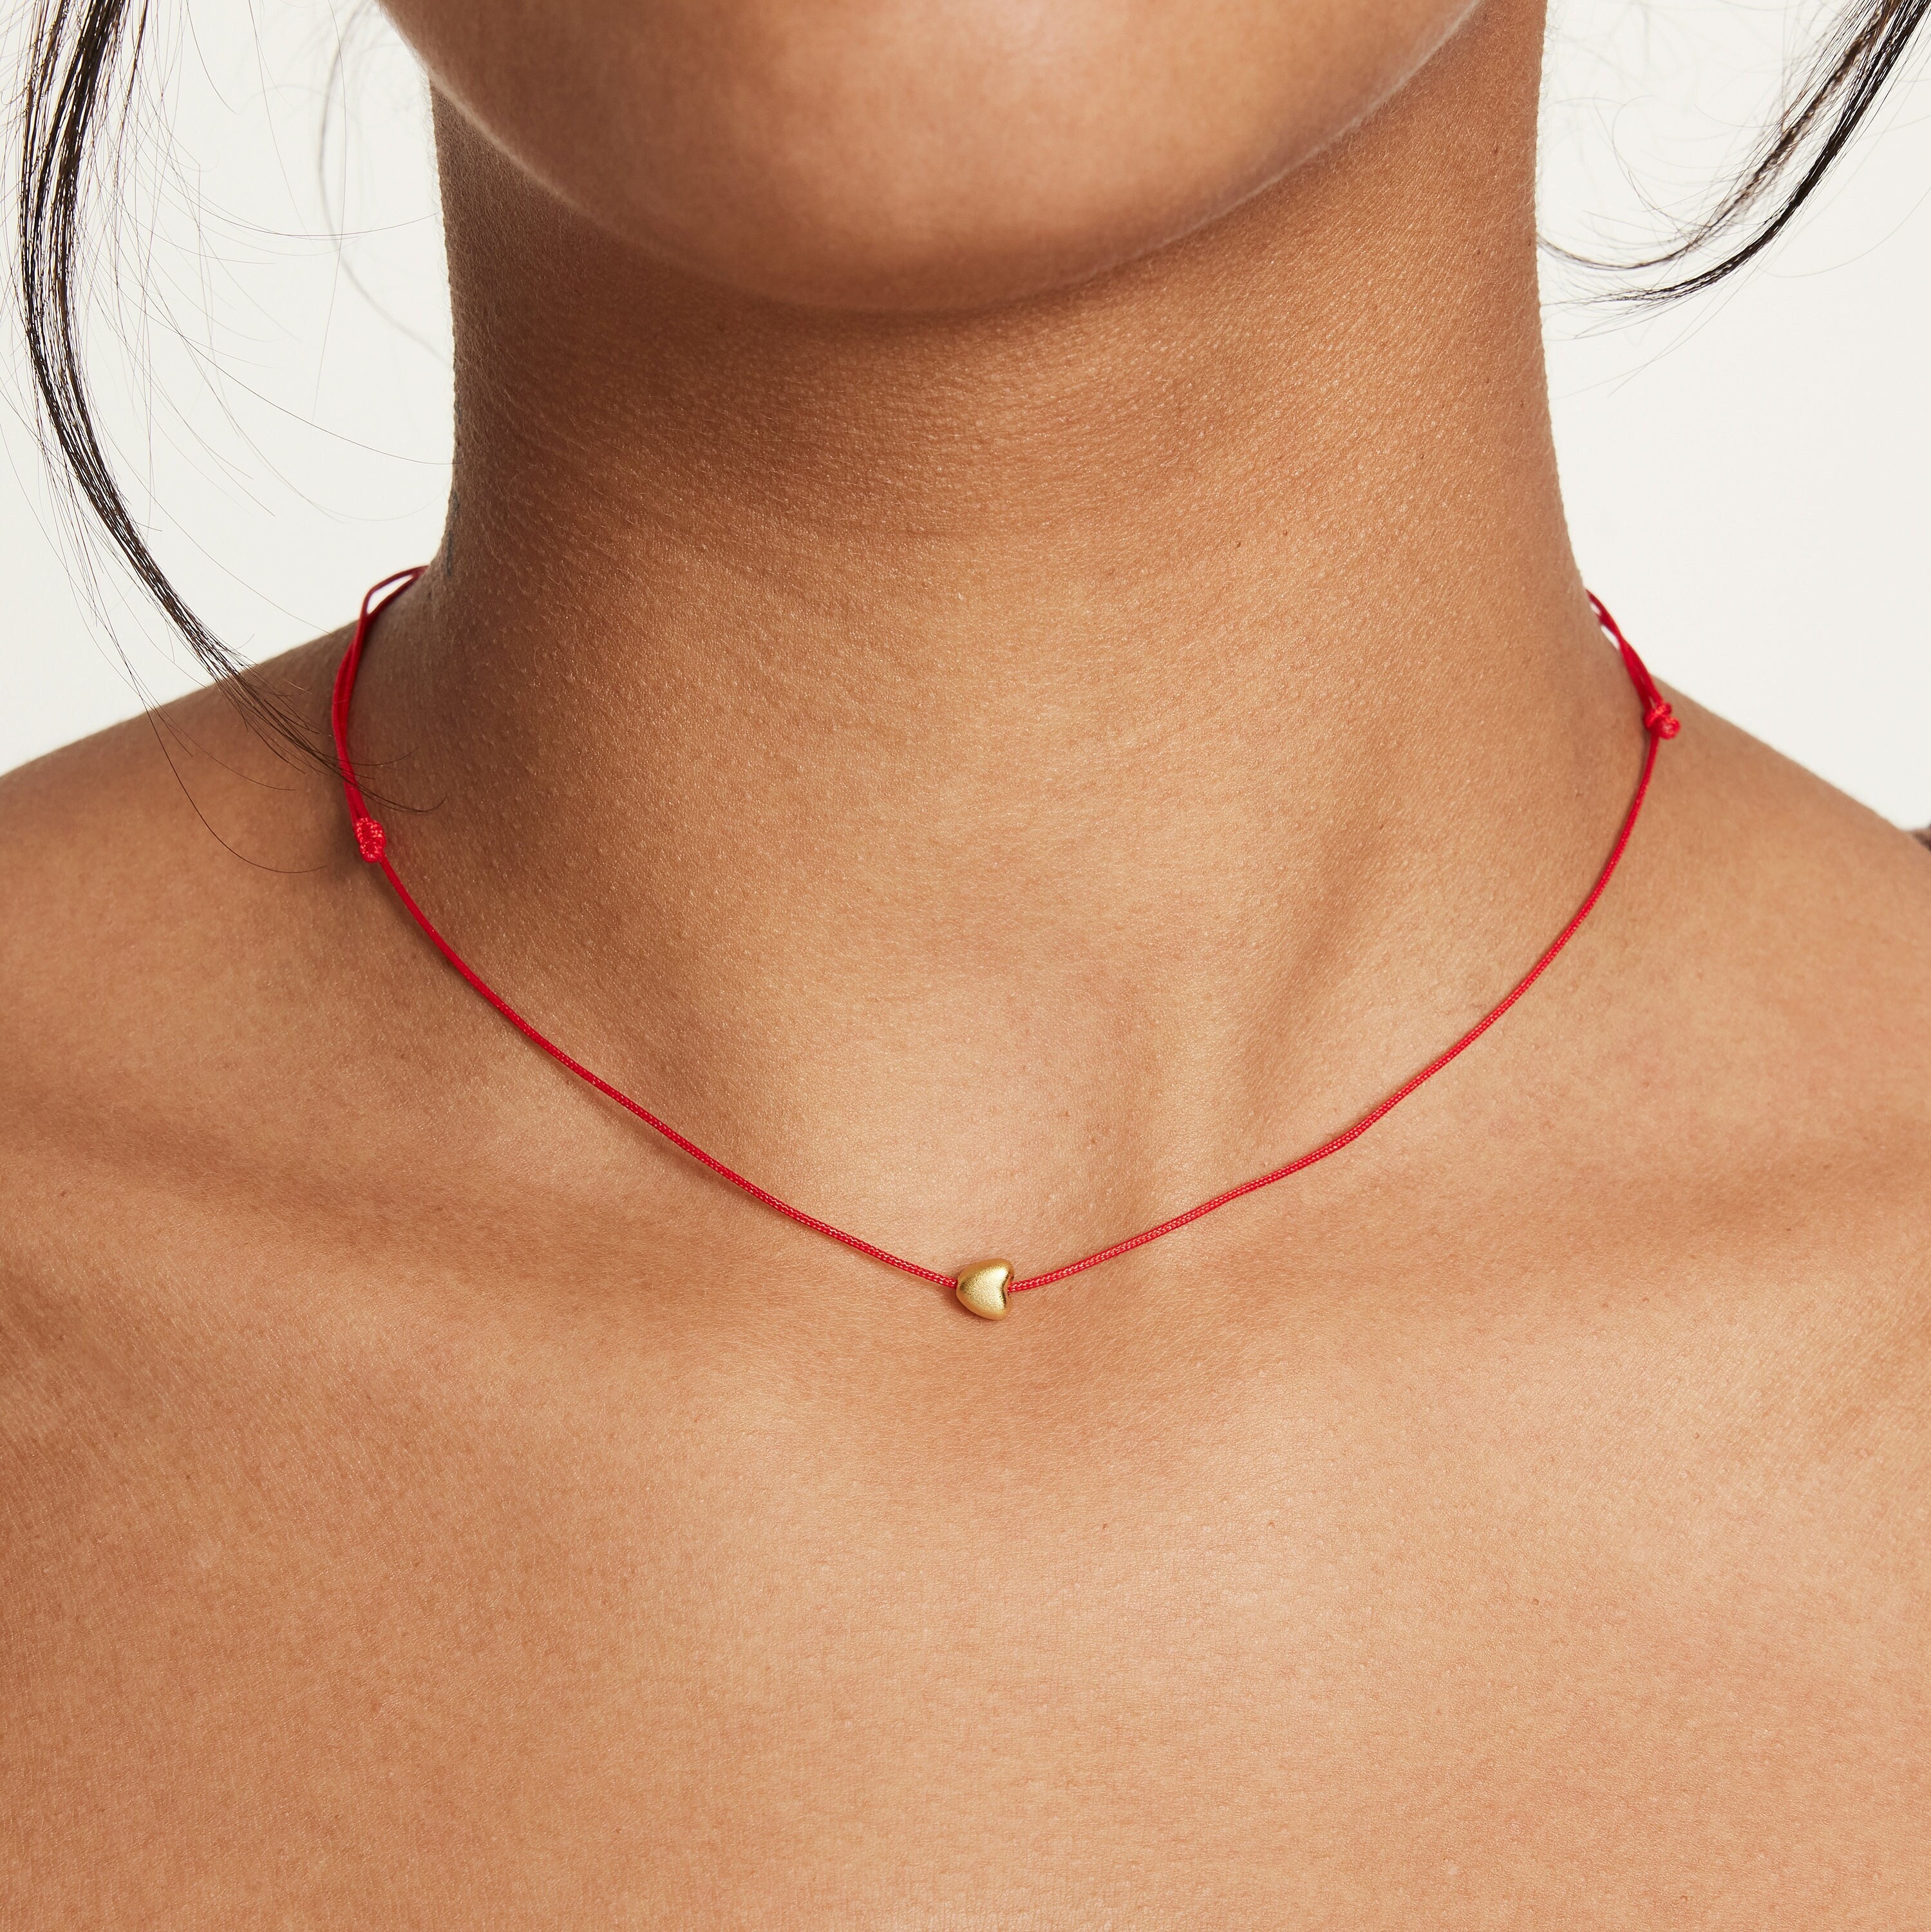 String Necklace, Red Thread